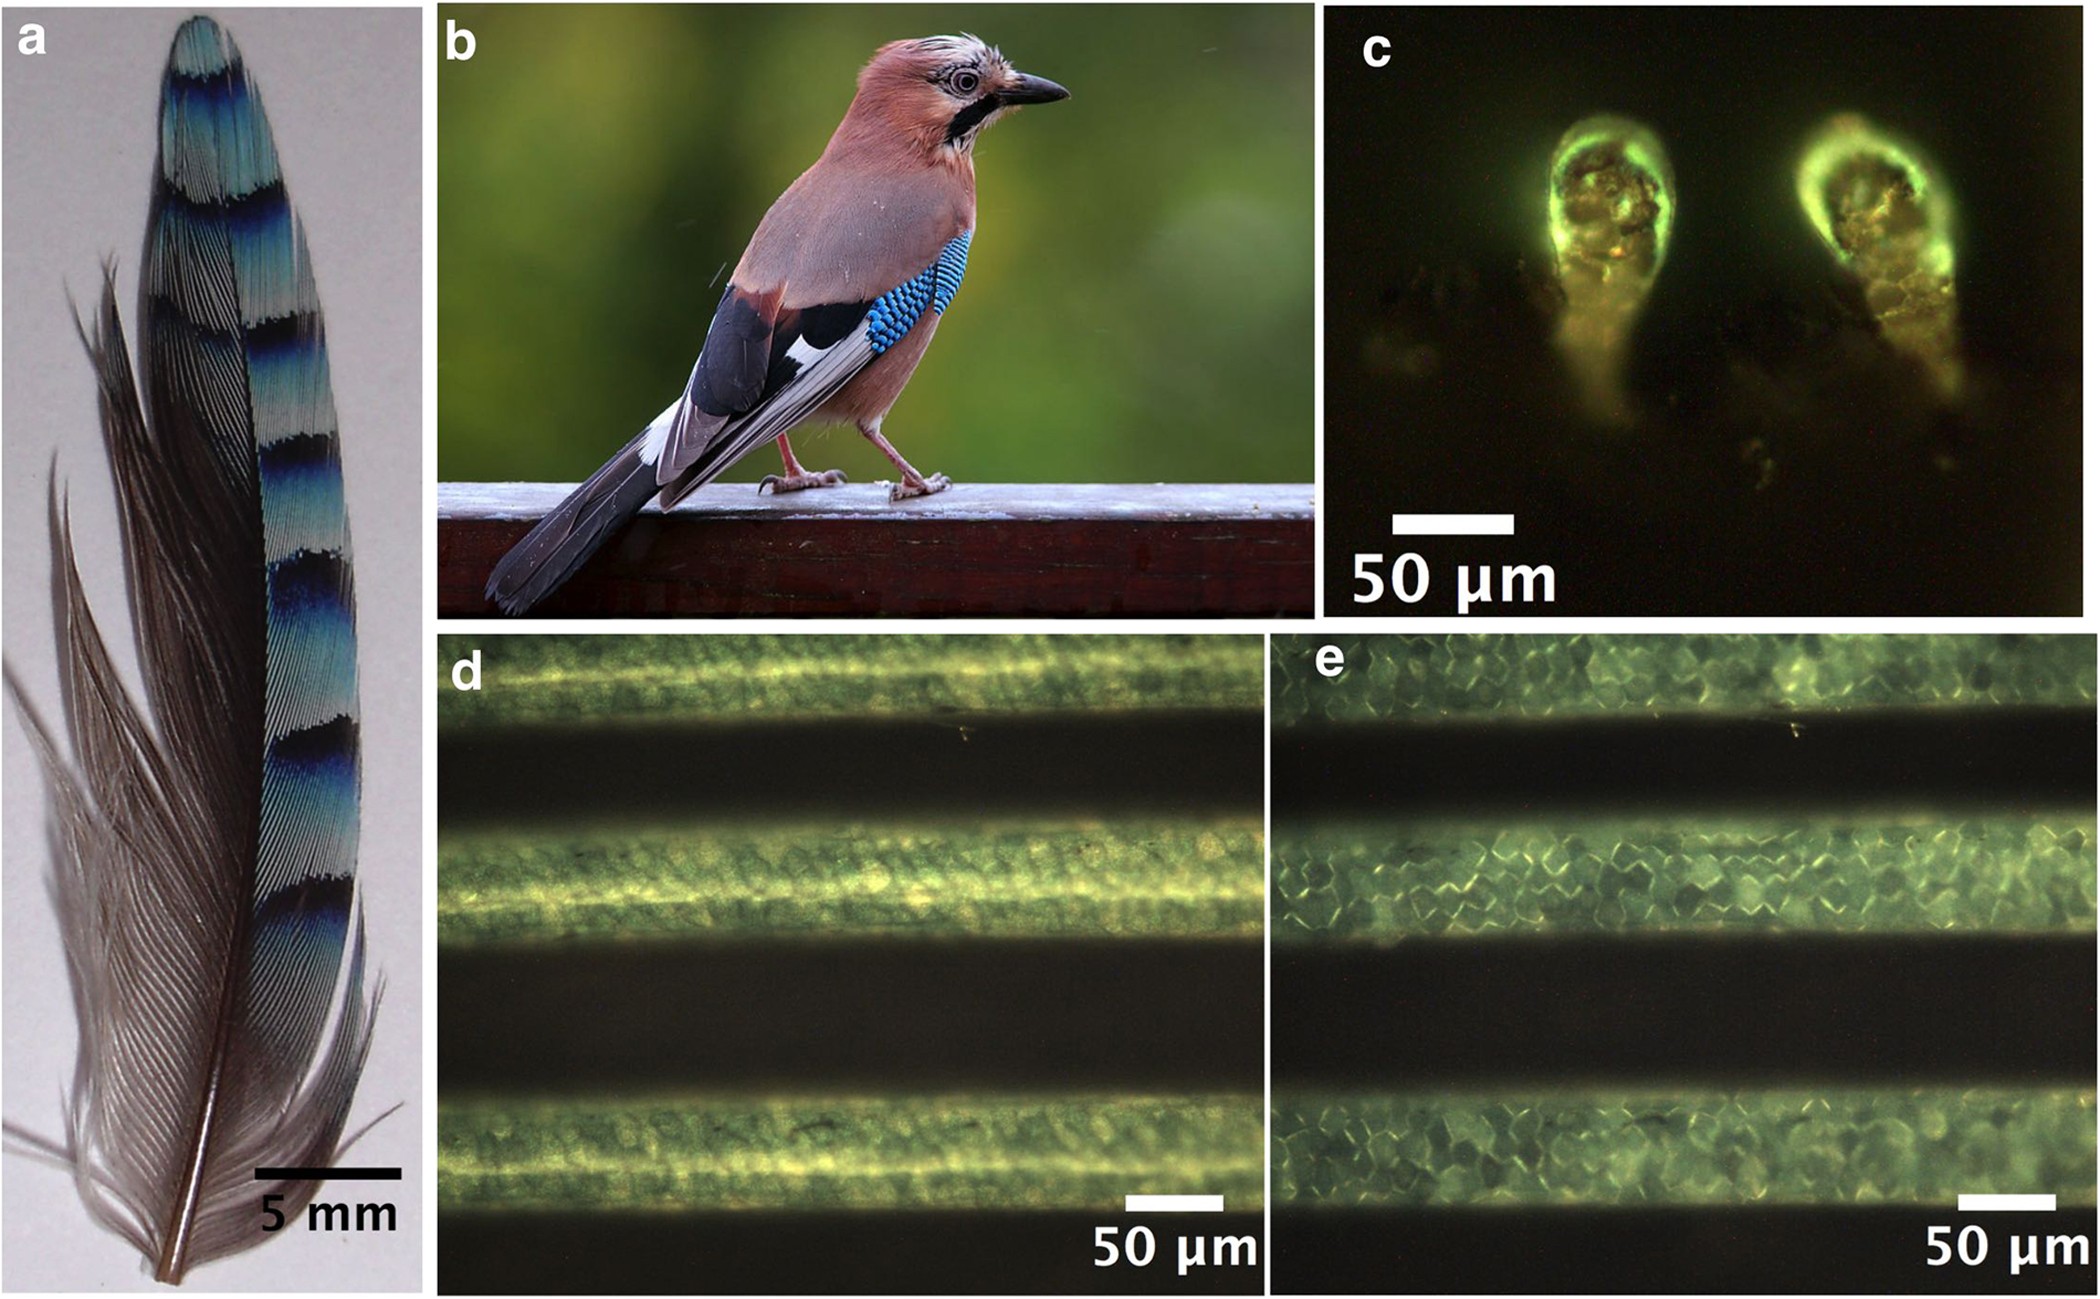 Spatially modulated structural colour in bird feathers